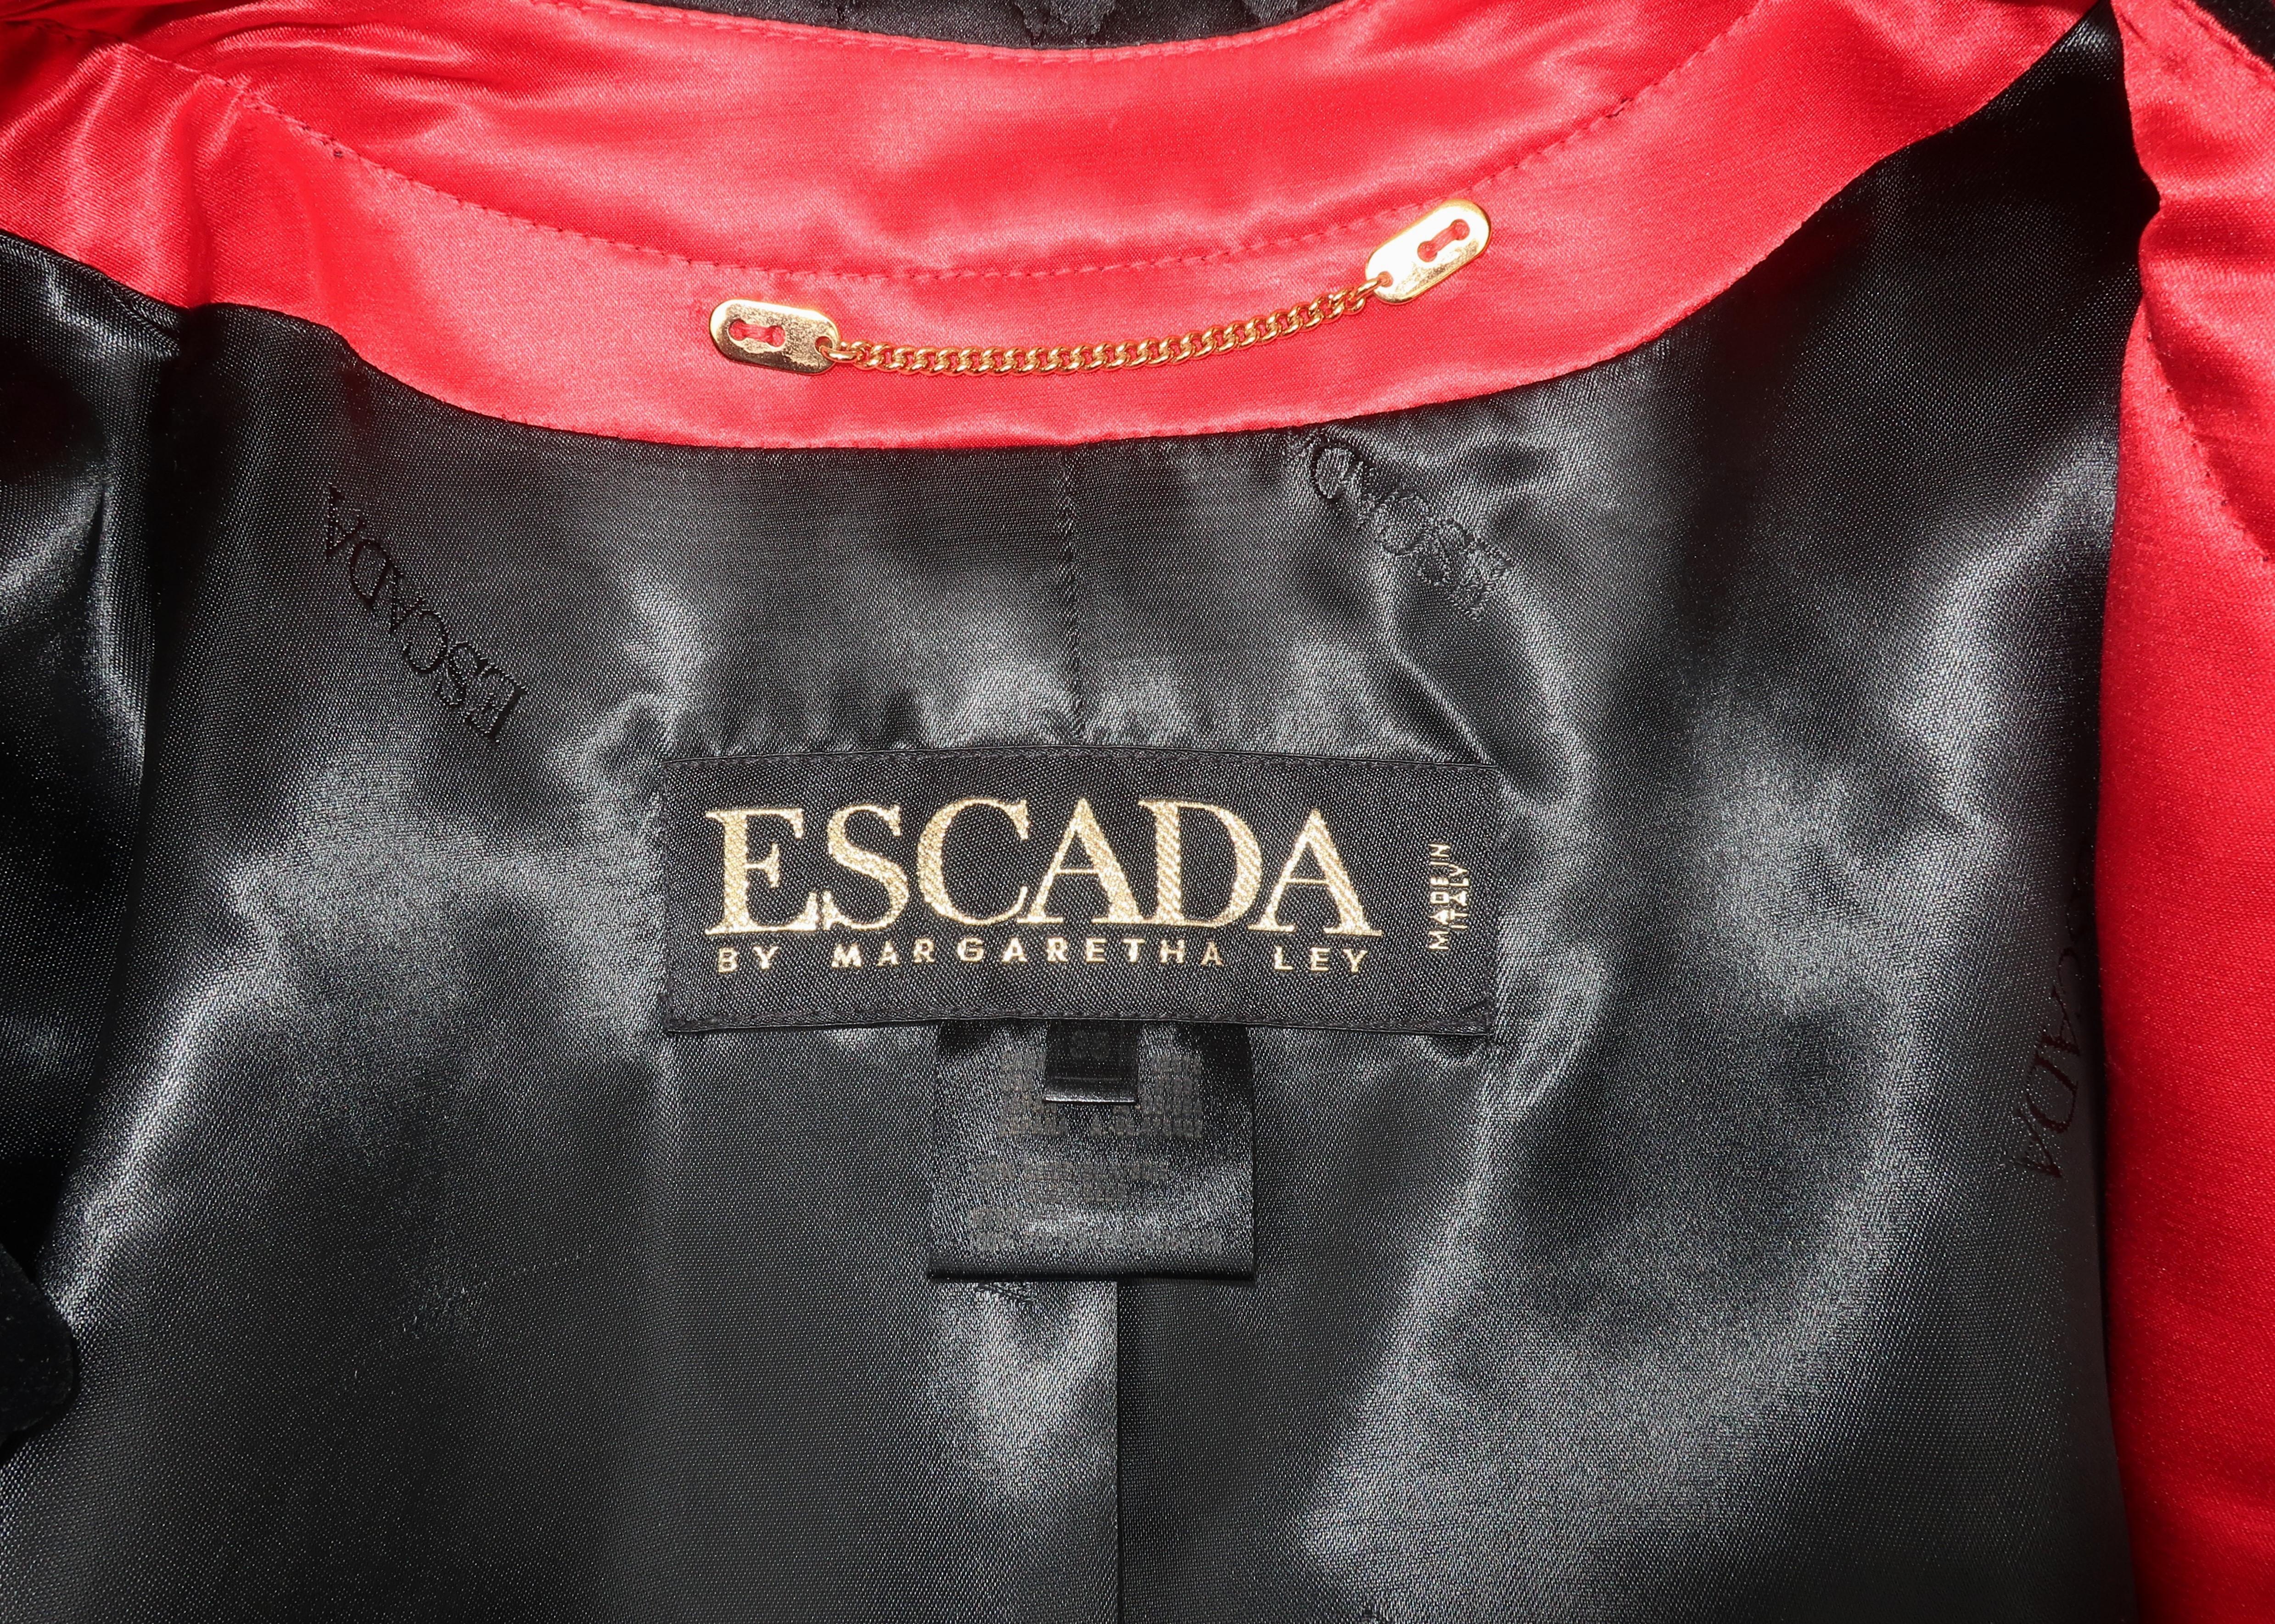 C.1990 Escada Black Silk Satin Quilted Jacket With Brooch Charms 6